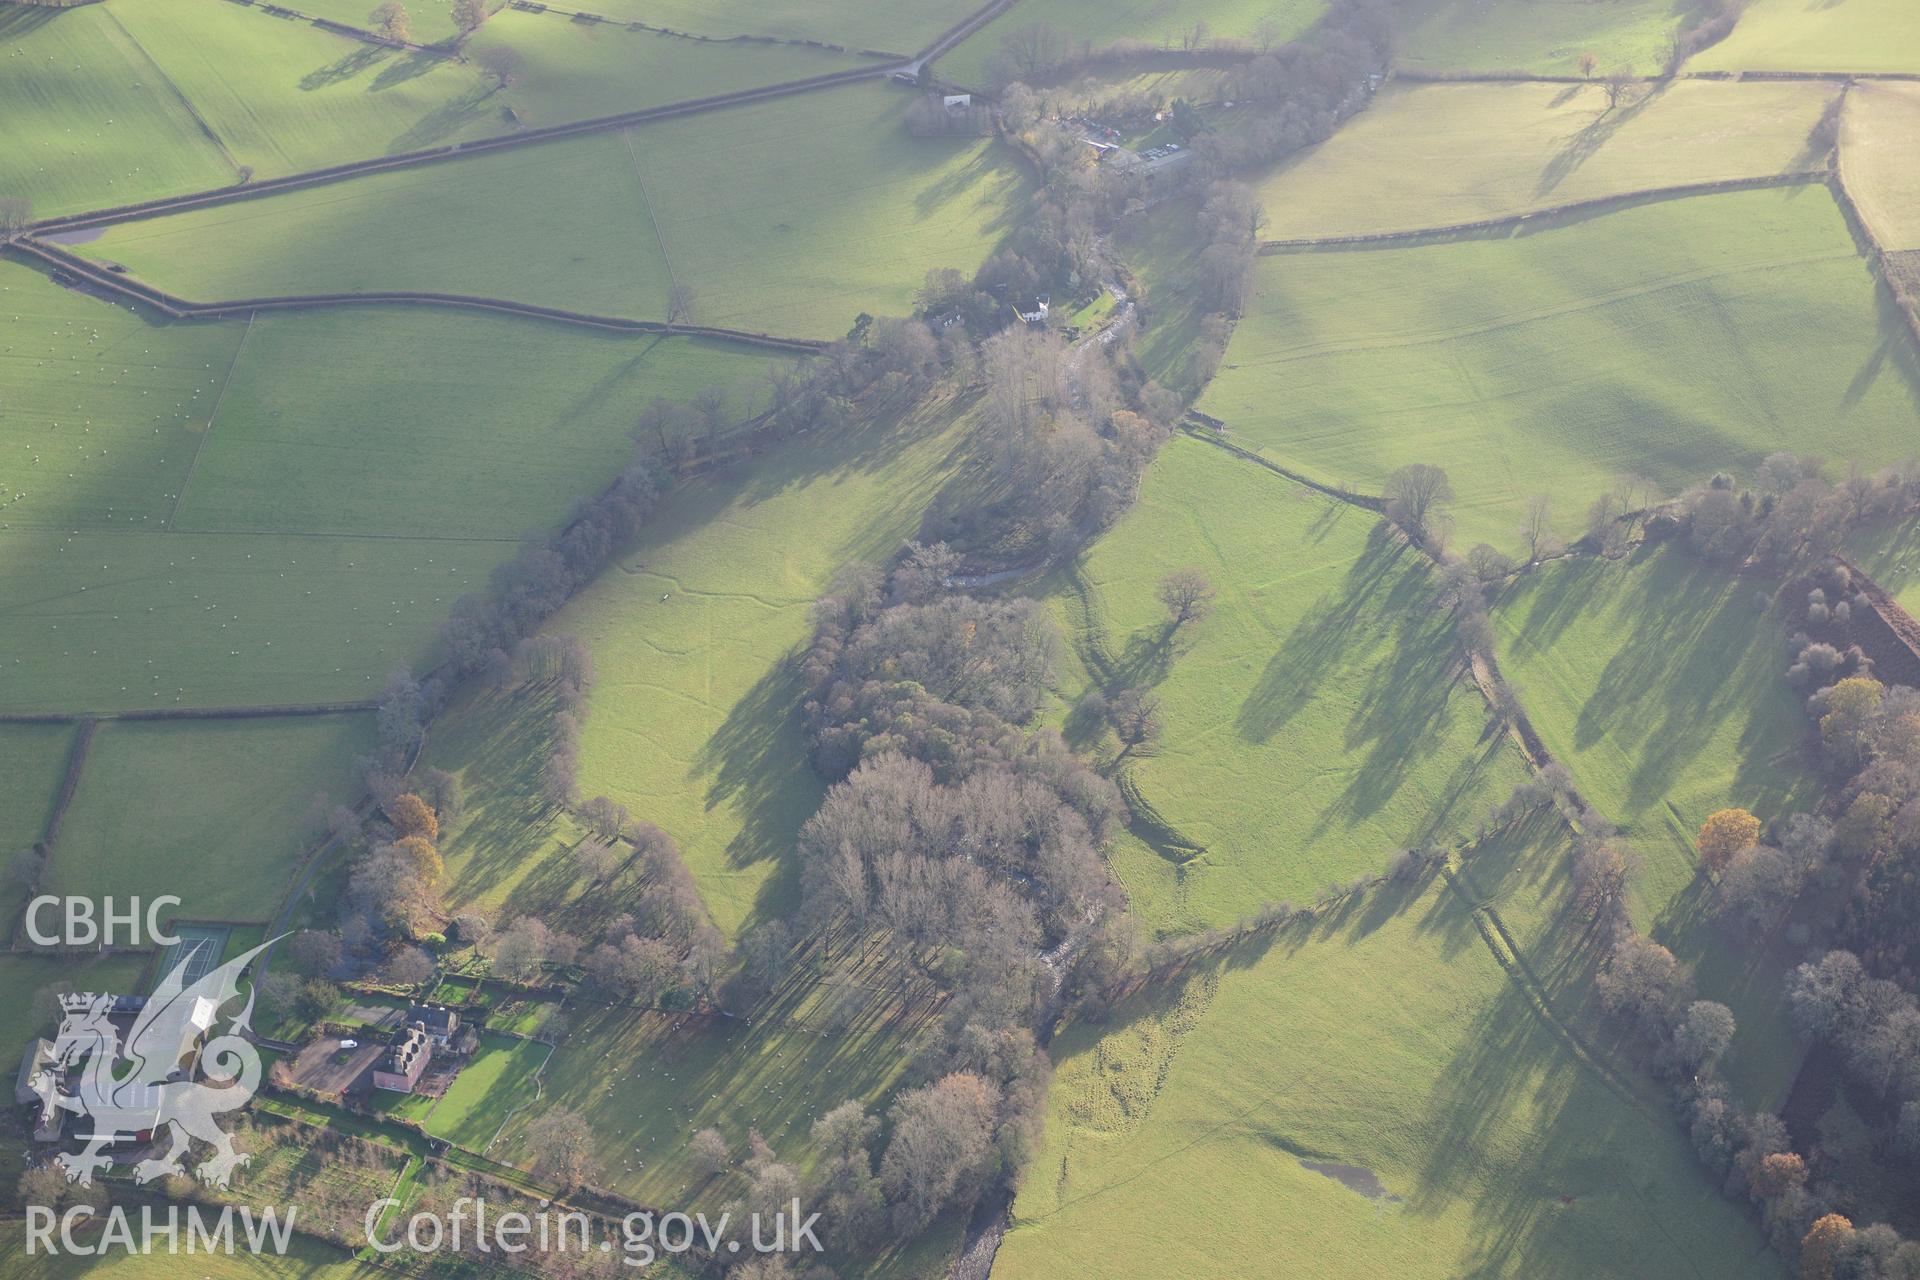 RCAHMW colour oblique photograph of Abercynrig, earthworks. Taken by Toby Driver on 23/11/2012.